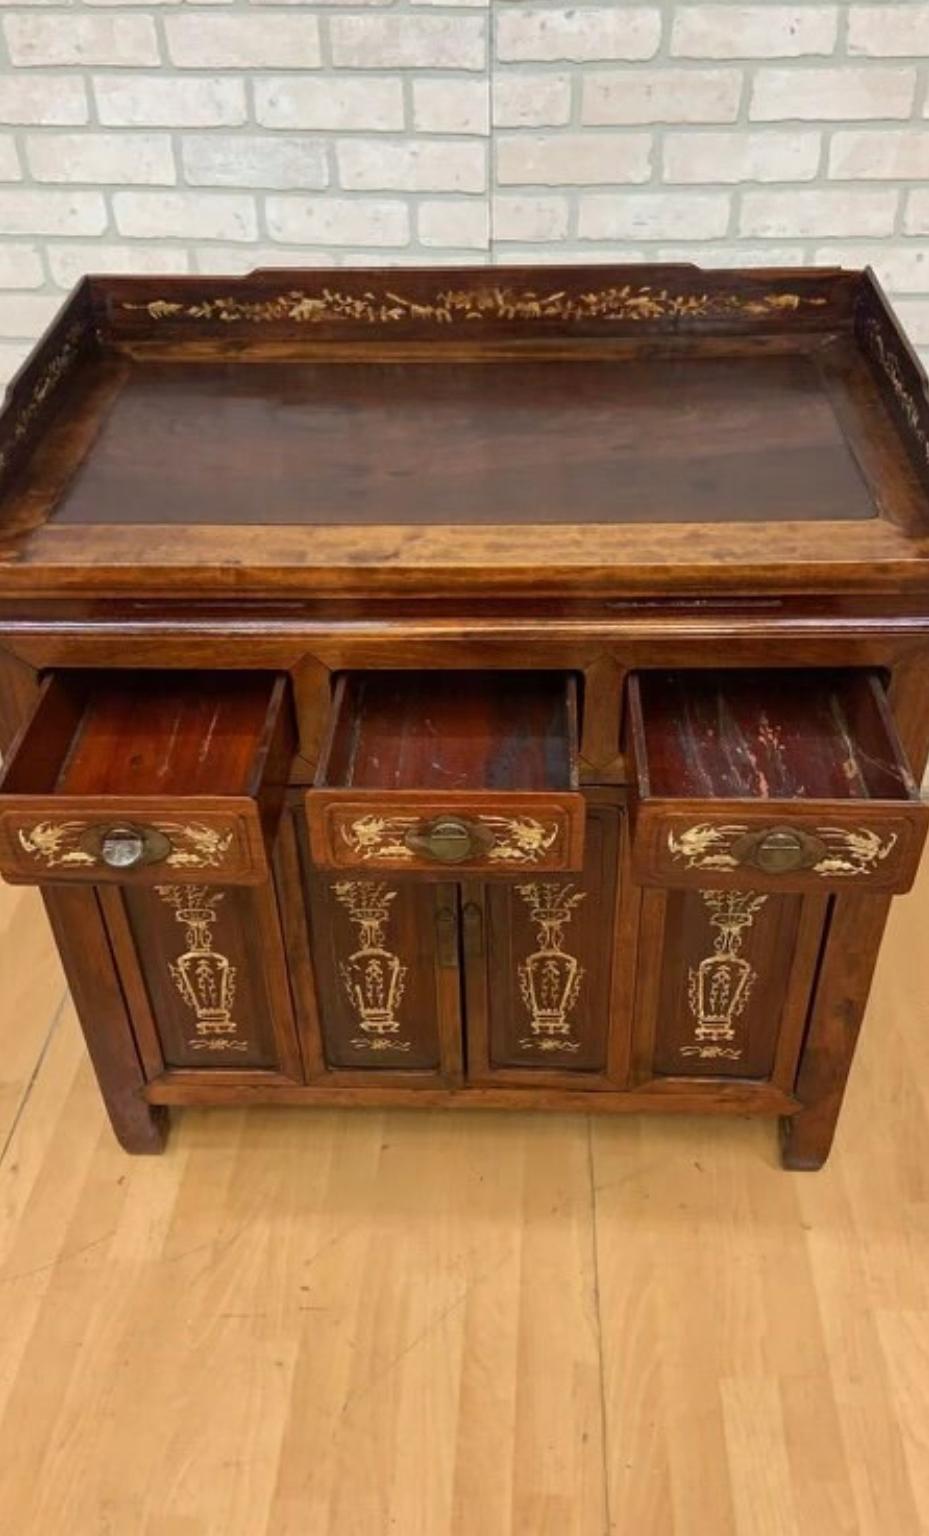 Antique Chinese Jiangsu Province Rosewood with Bone Inlay Sideboard Cabinet In Good Condition For Sale In Chicago, IL